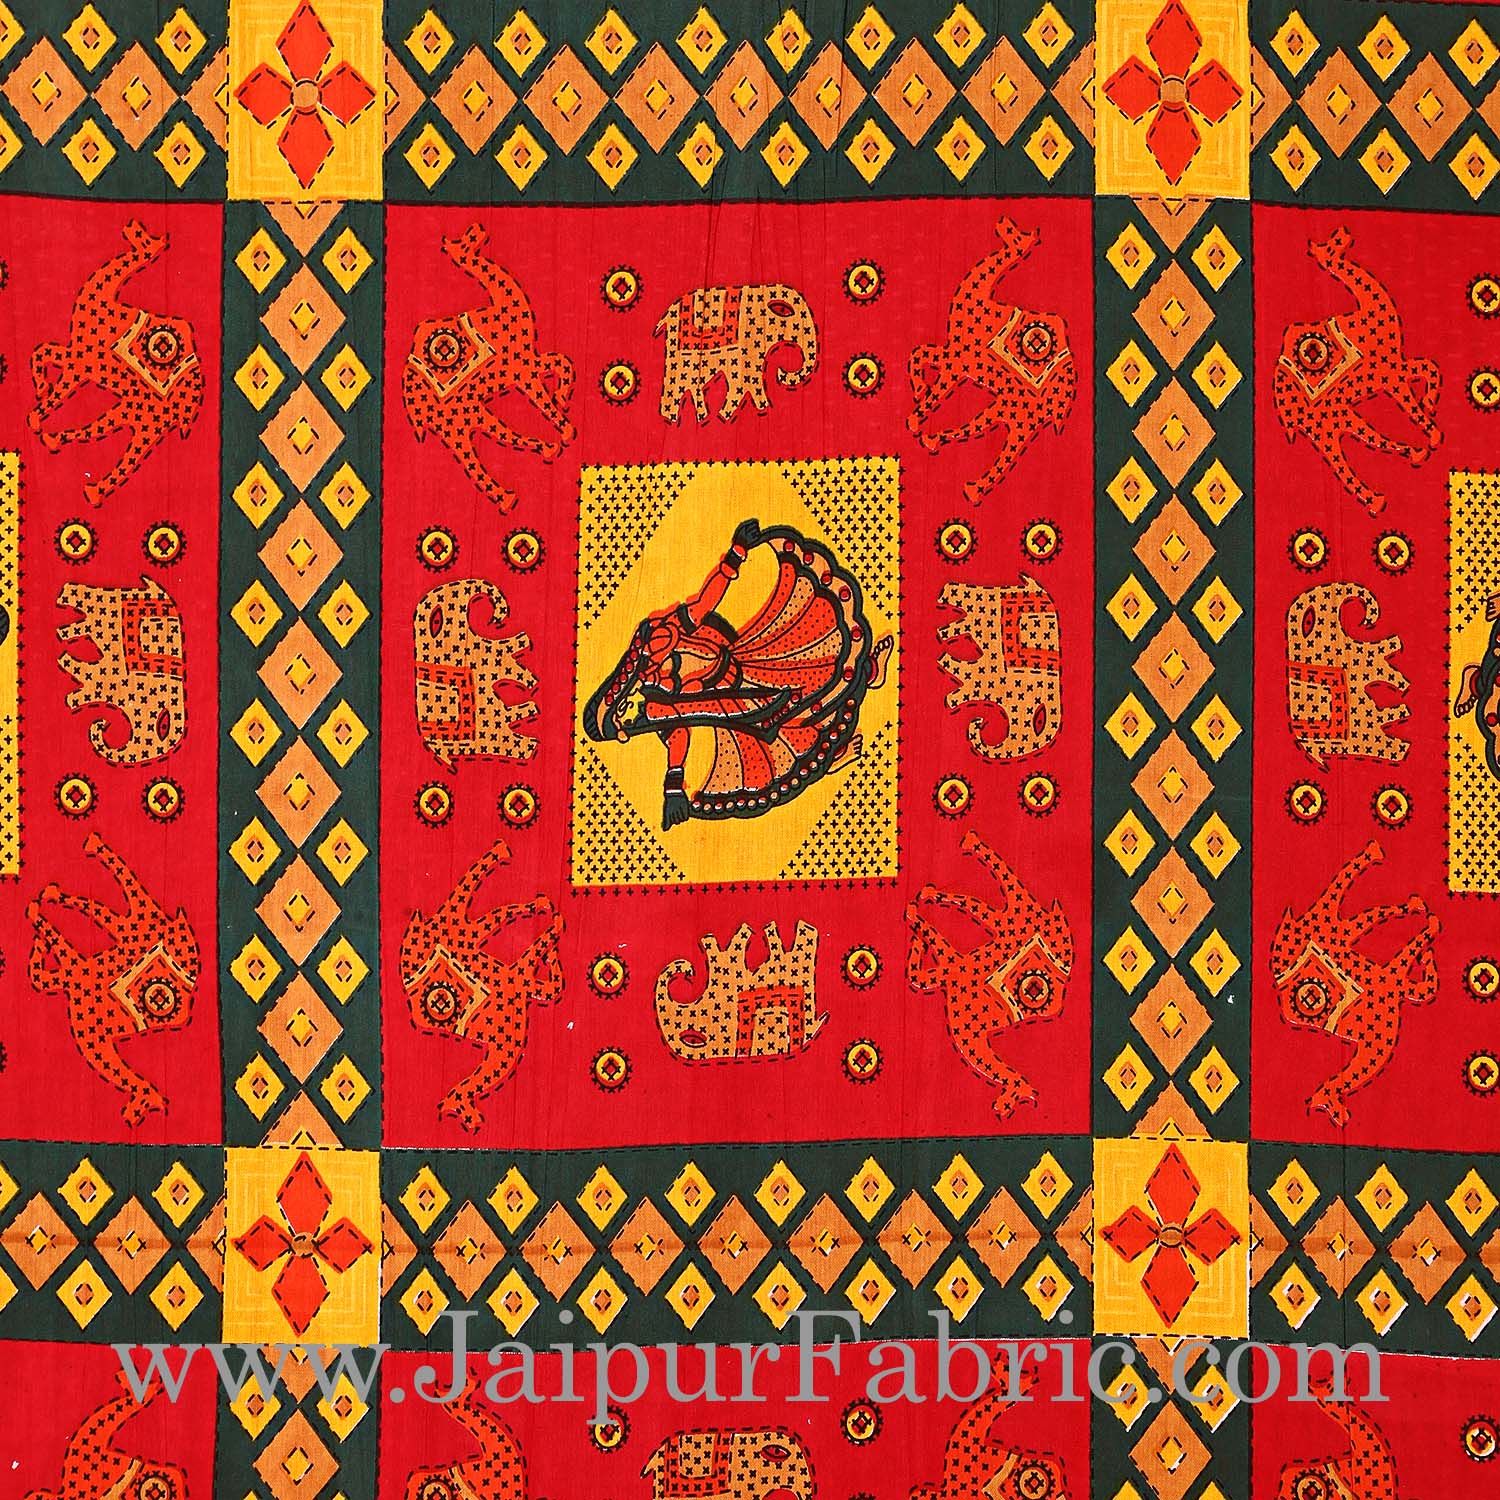 Yellow Border Red Base Gujri Dance In Square Pattern Cotton Double Bed Sheet